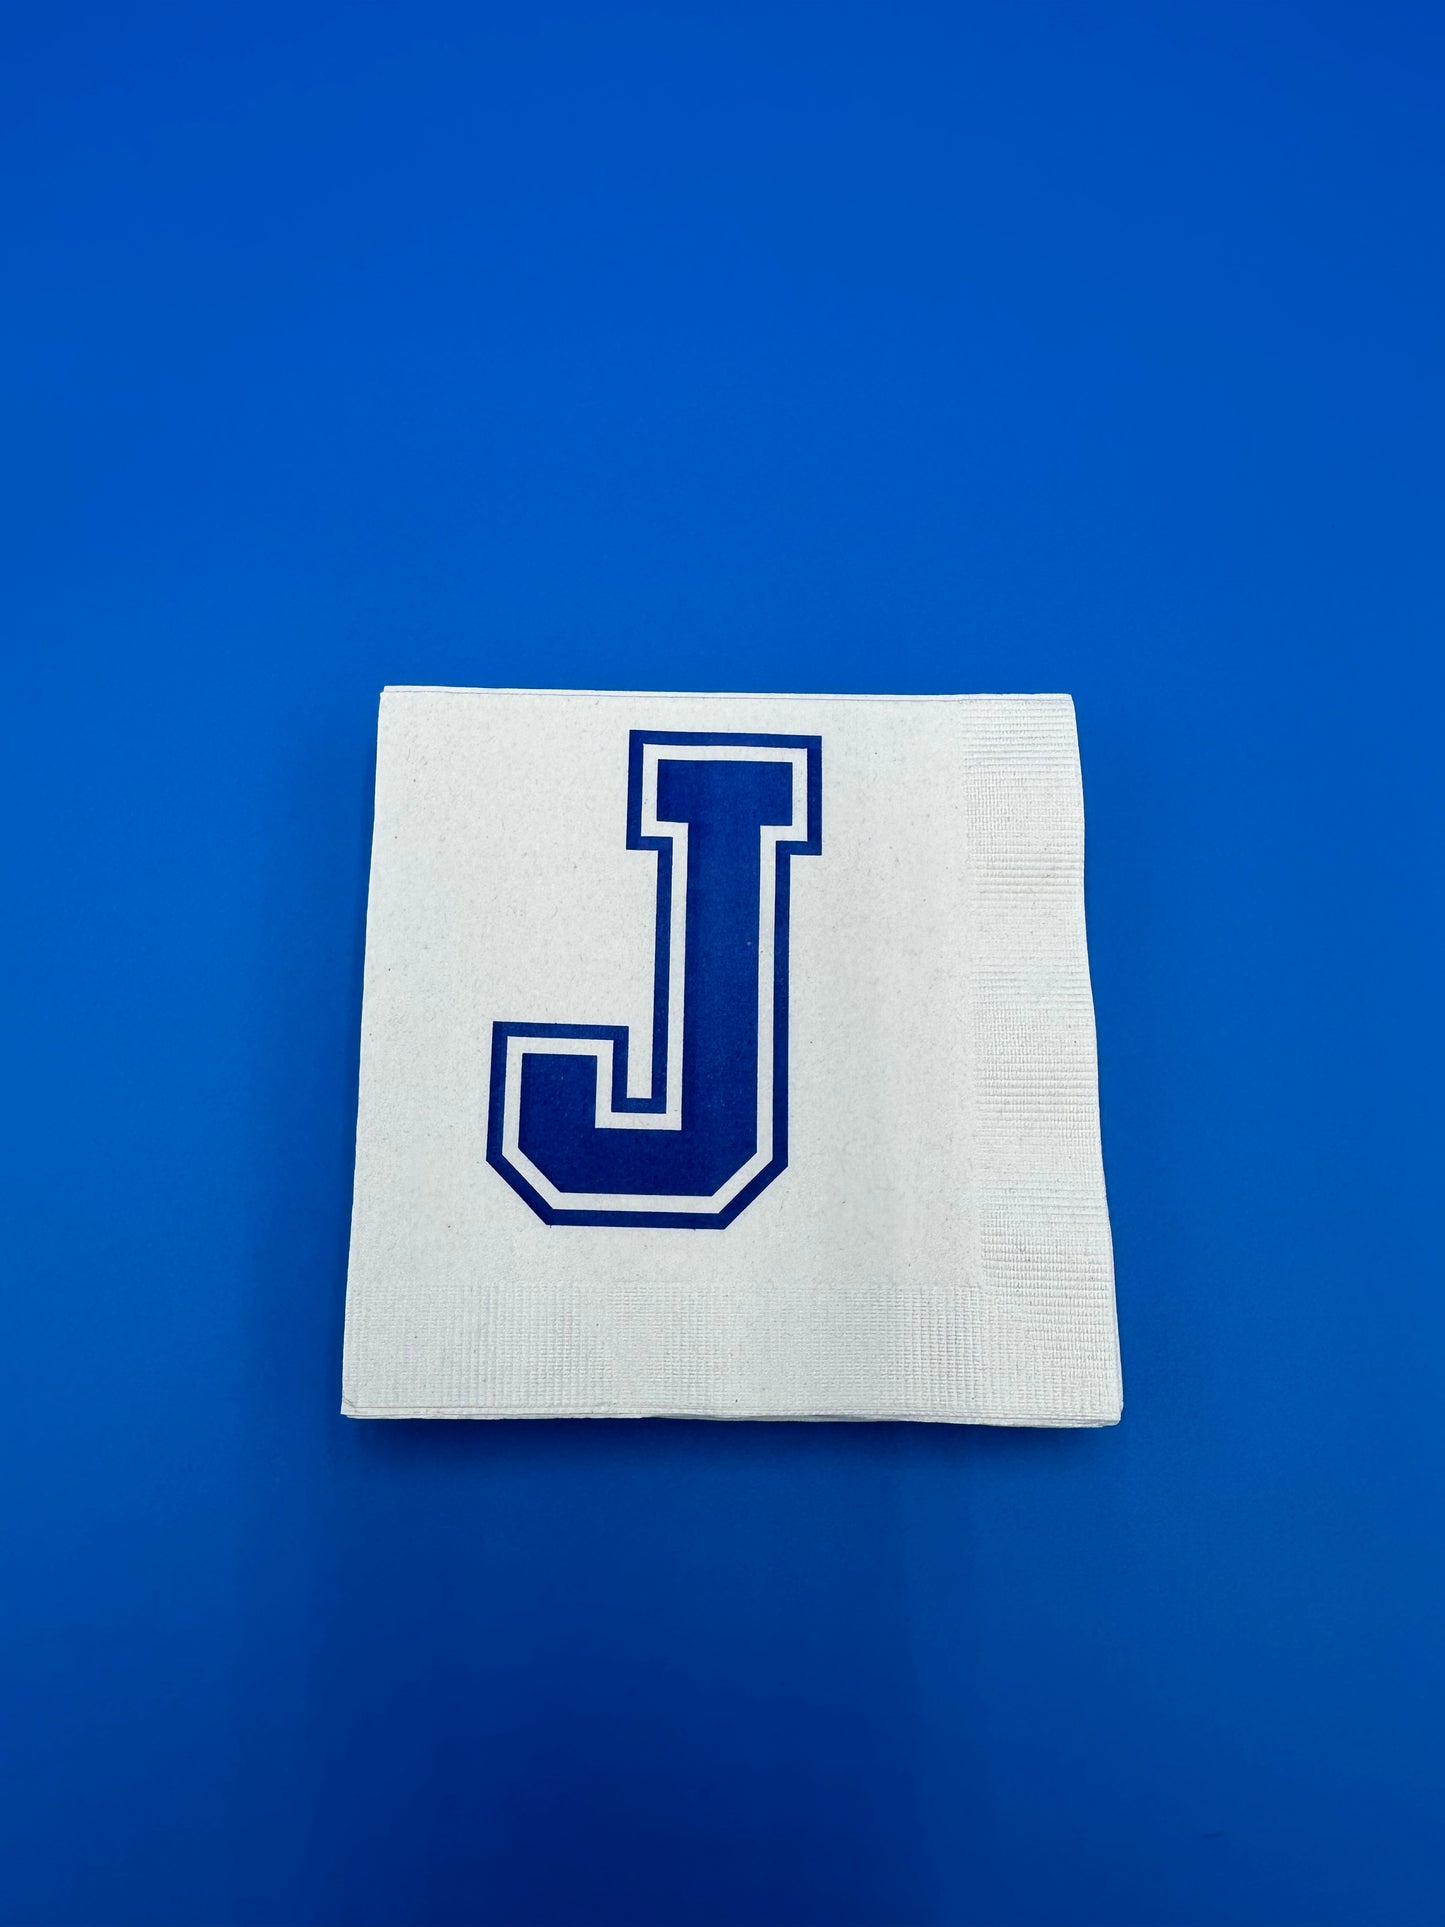 For your Jesuit parties!  Beverage size white napkins with J logo.  Package of 20 napkins in set.  Measures 5" x 5".